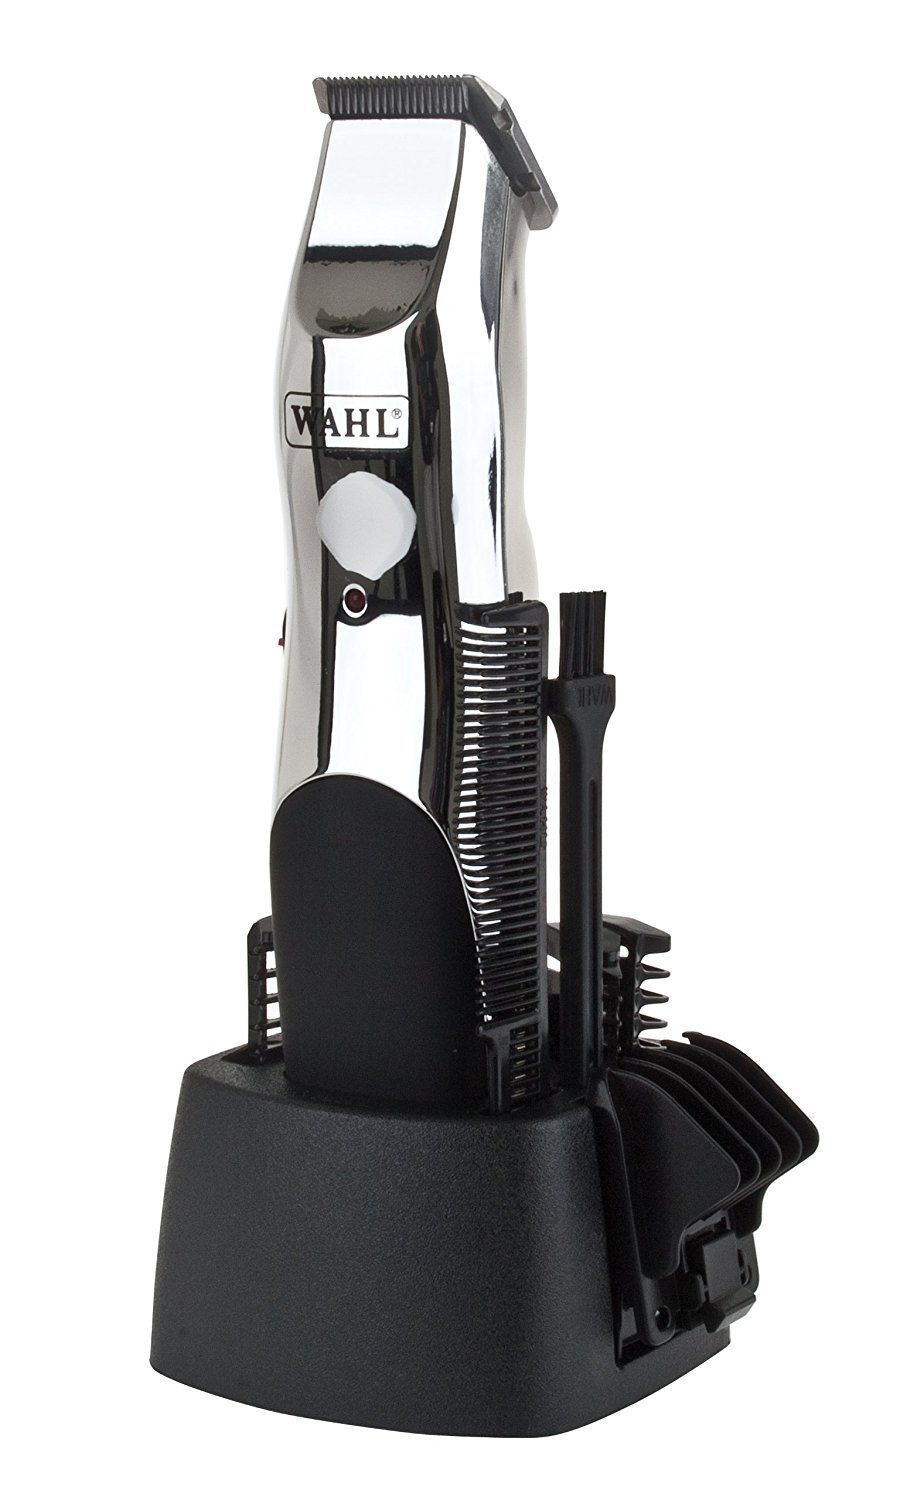 Wahl 9916 cordless trimmer